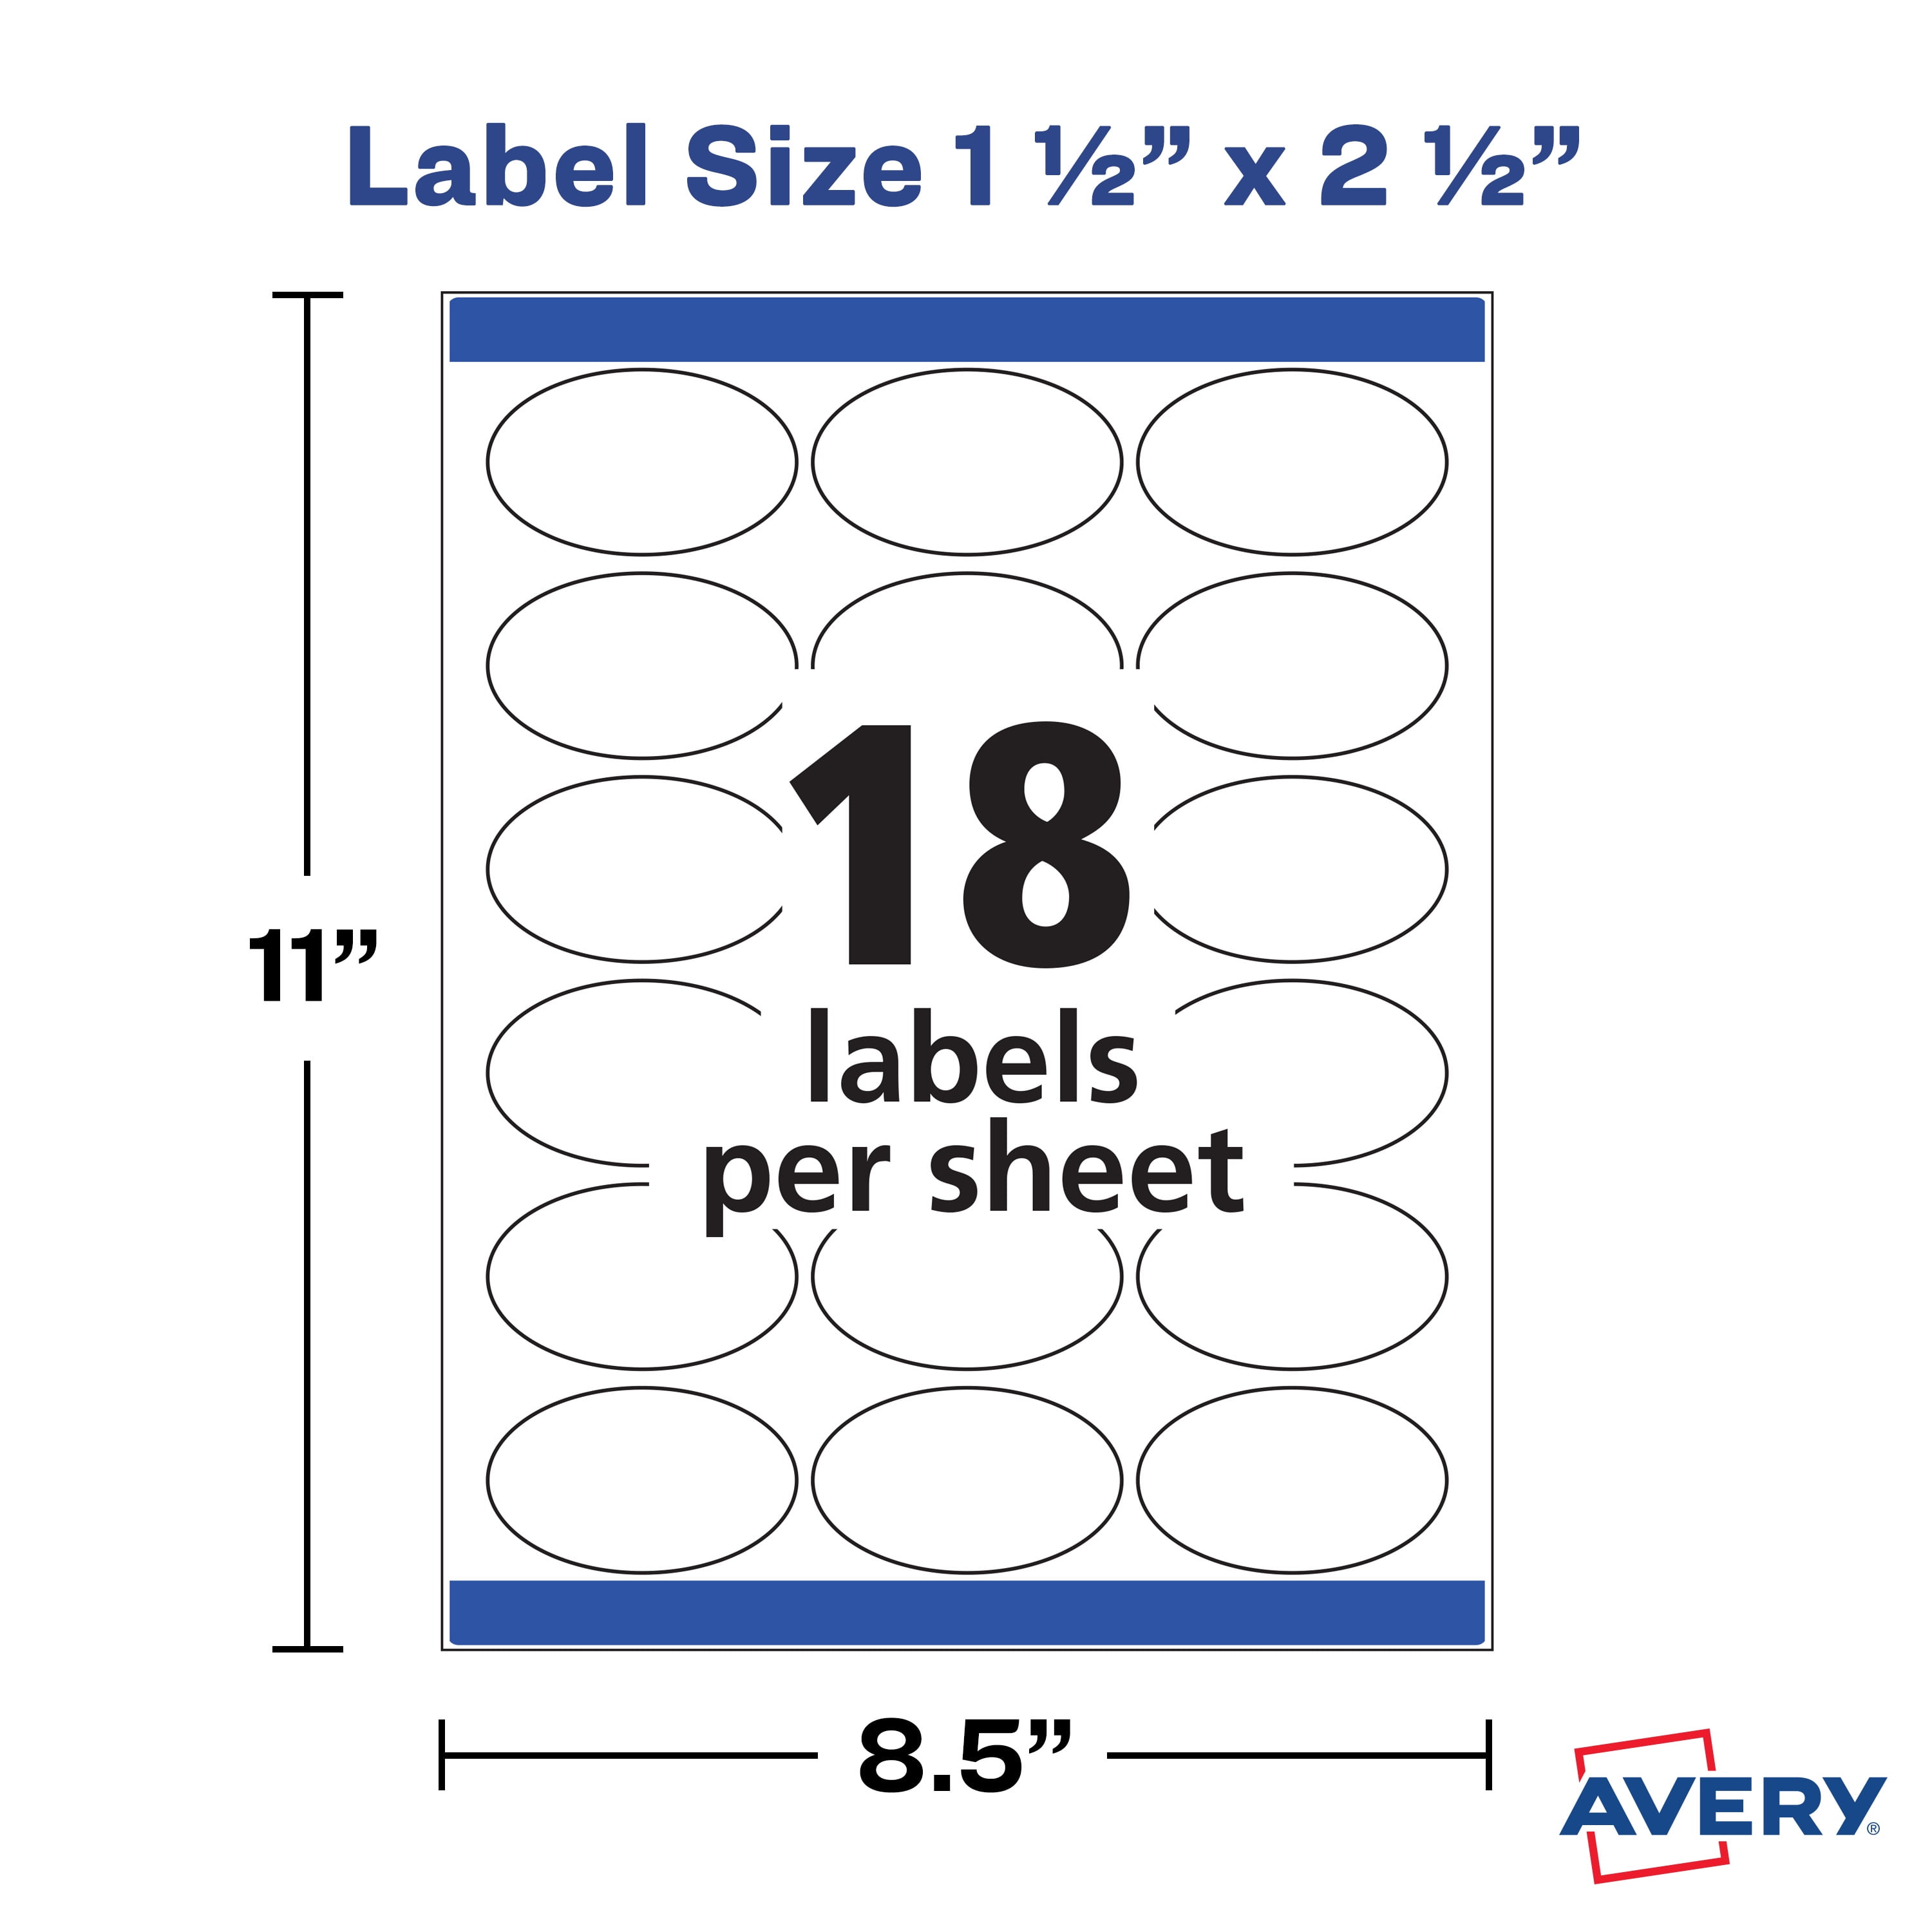 Avery Printable Fabric Sheets A4 1up 5 Sheets L9415, Avery, Labels & Tags, Multi-purpose Labels — Discount Office